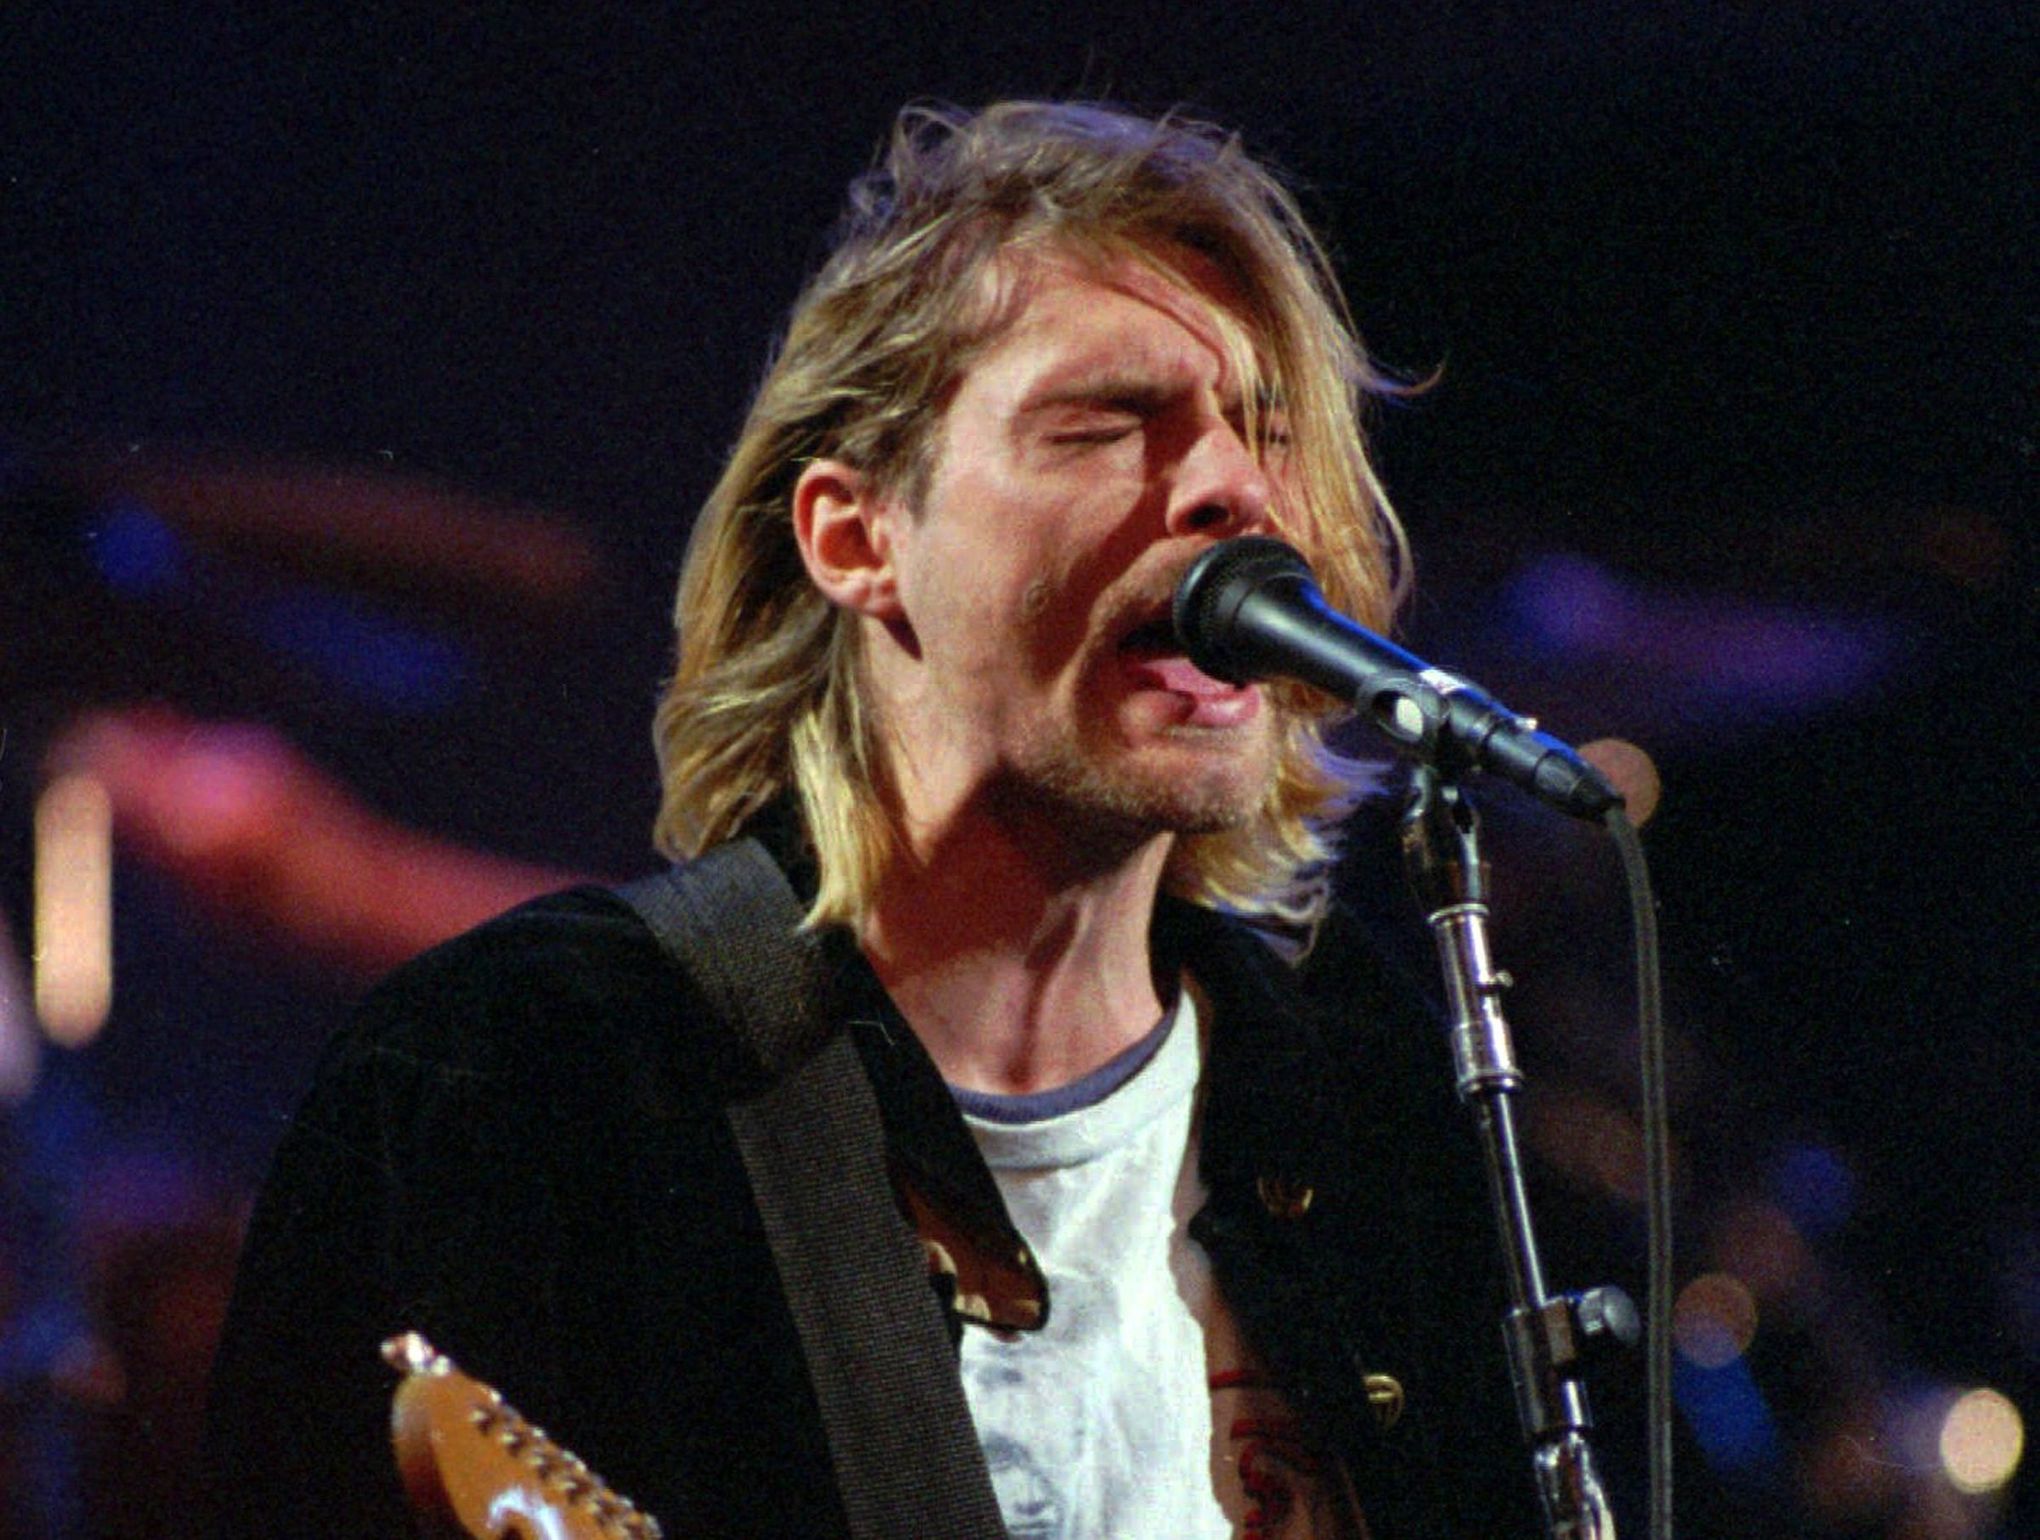 Kurt Cobain died 25 years ago today. Why he still matters. | The Seattle Times